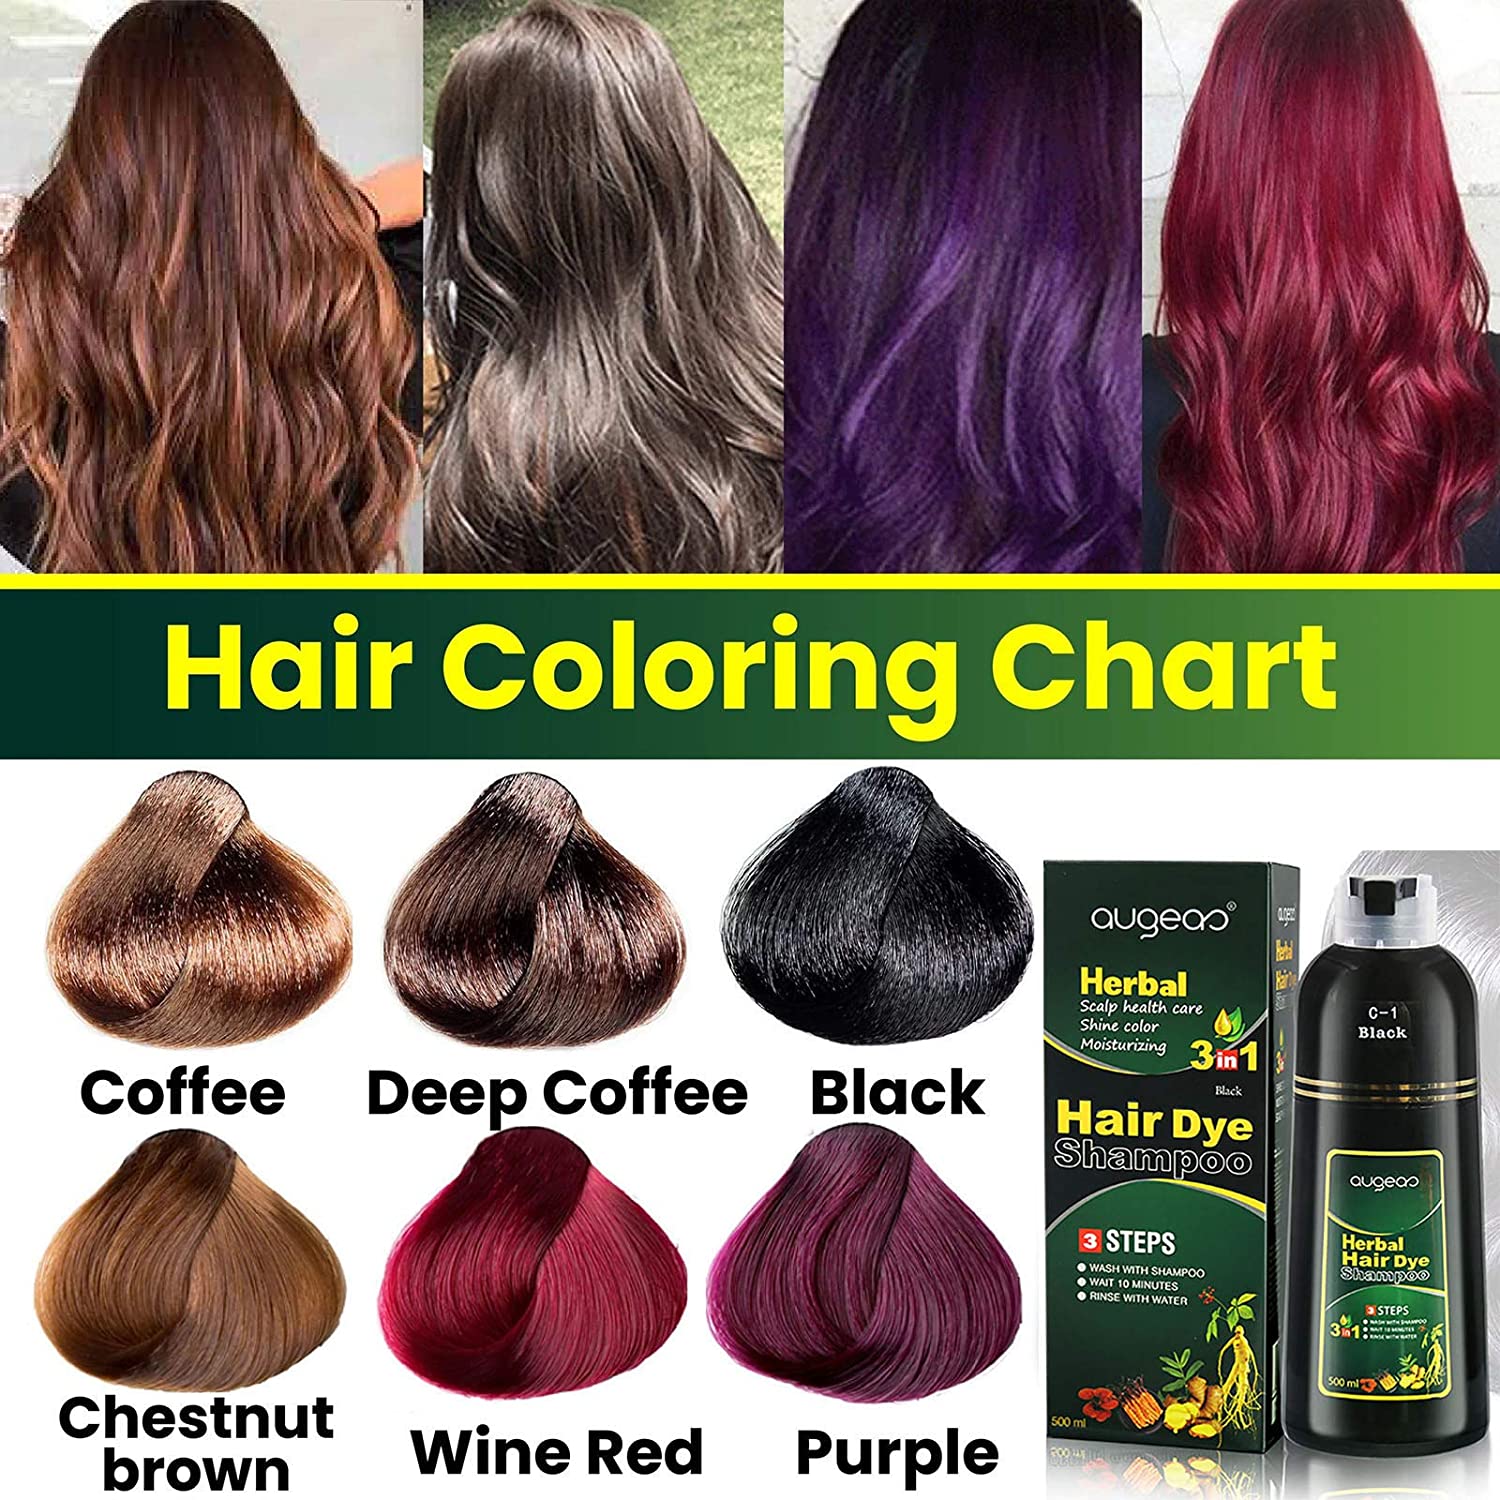 Wine Red Hair Color Shampoo | 3 in 1 with a FREE Pair of Gloves | 500ml / 16.9 Fl Oz | Grey Hair Coverage | AUGEAS - SH Salons